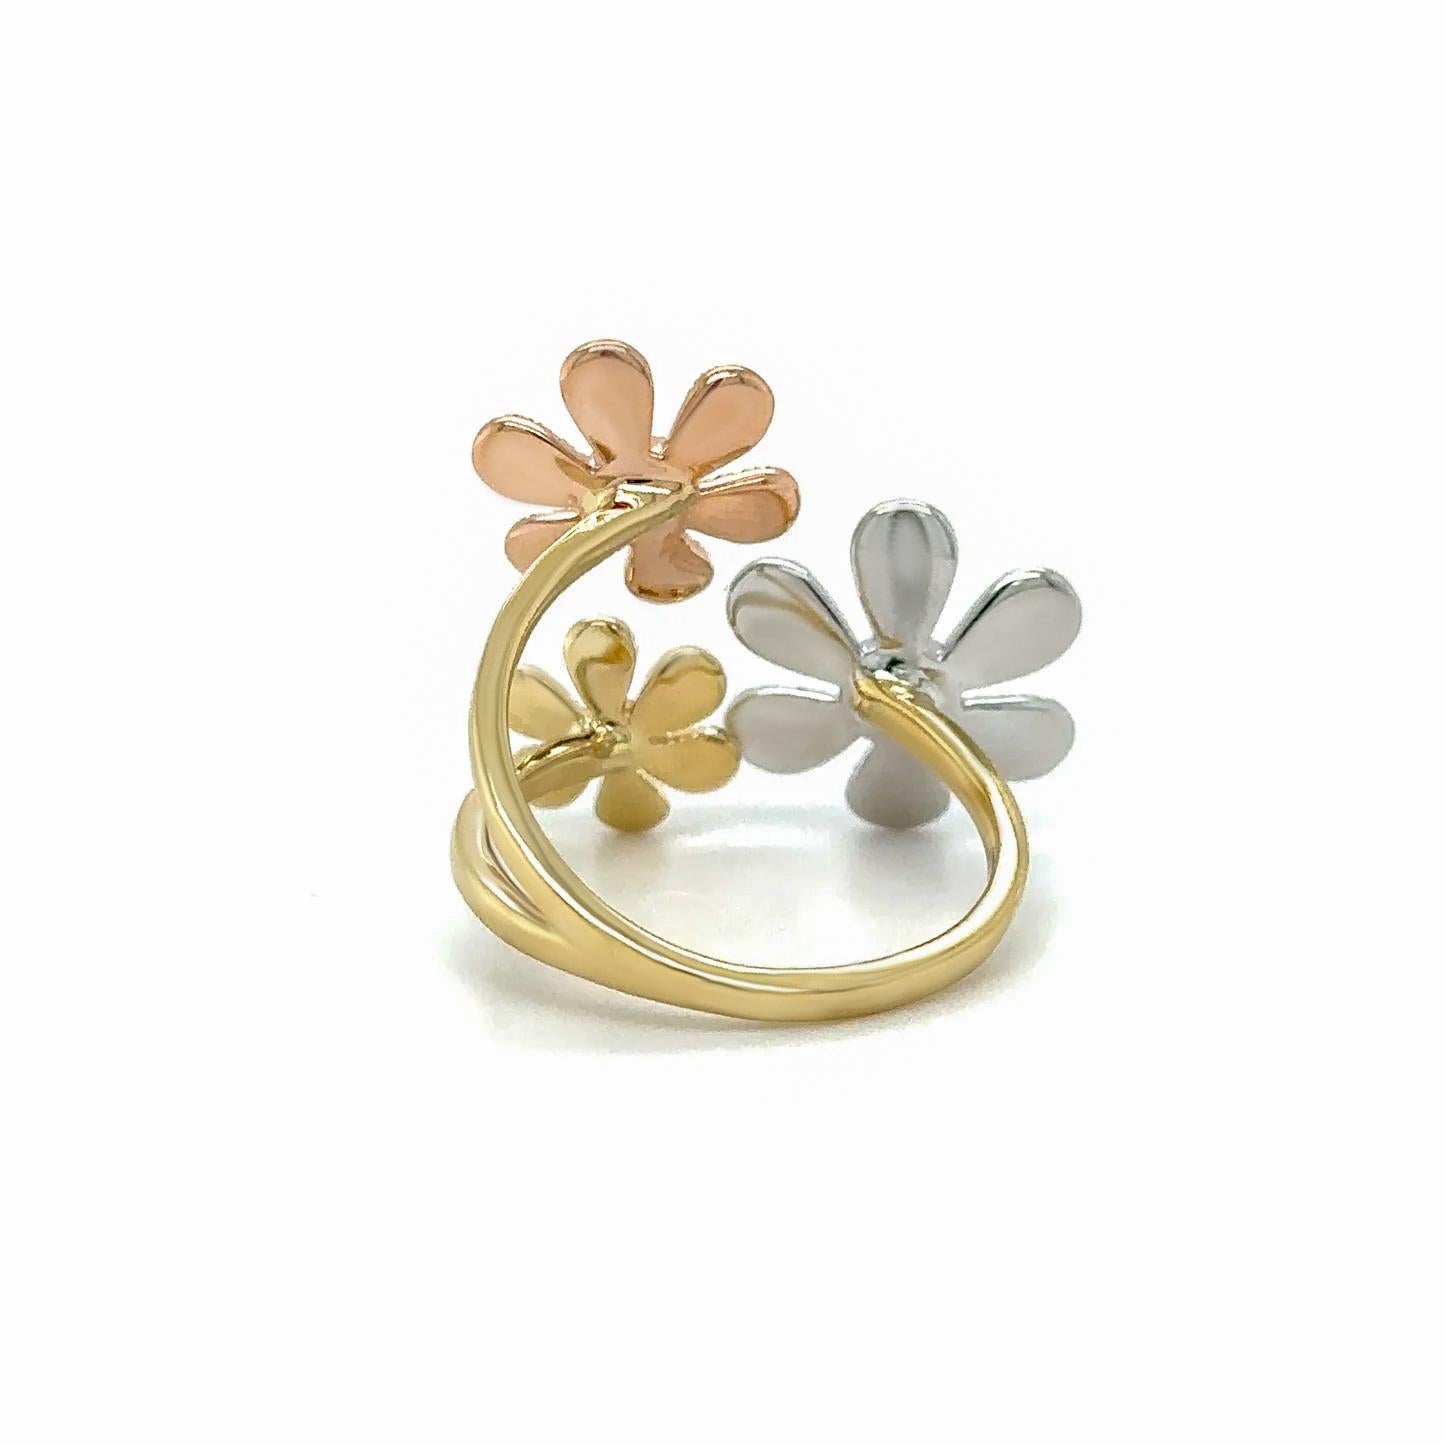 Diamond Flower Ring 261 Diamonds 14K Tri-Color Gold In Excellent Condition For Sale In Laguna Niguel, CA